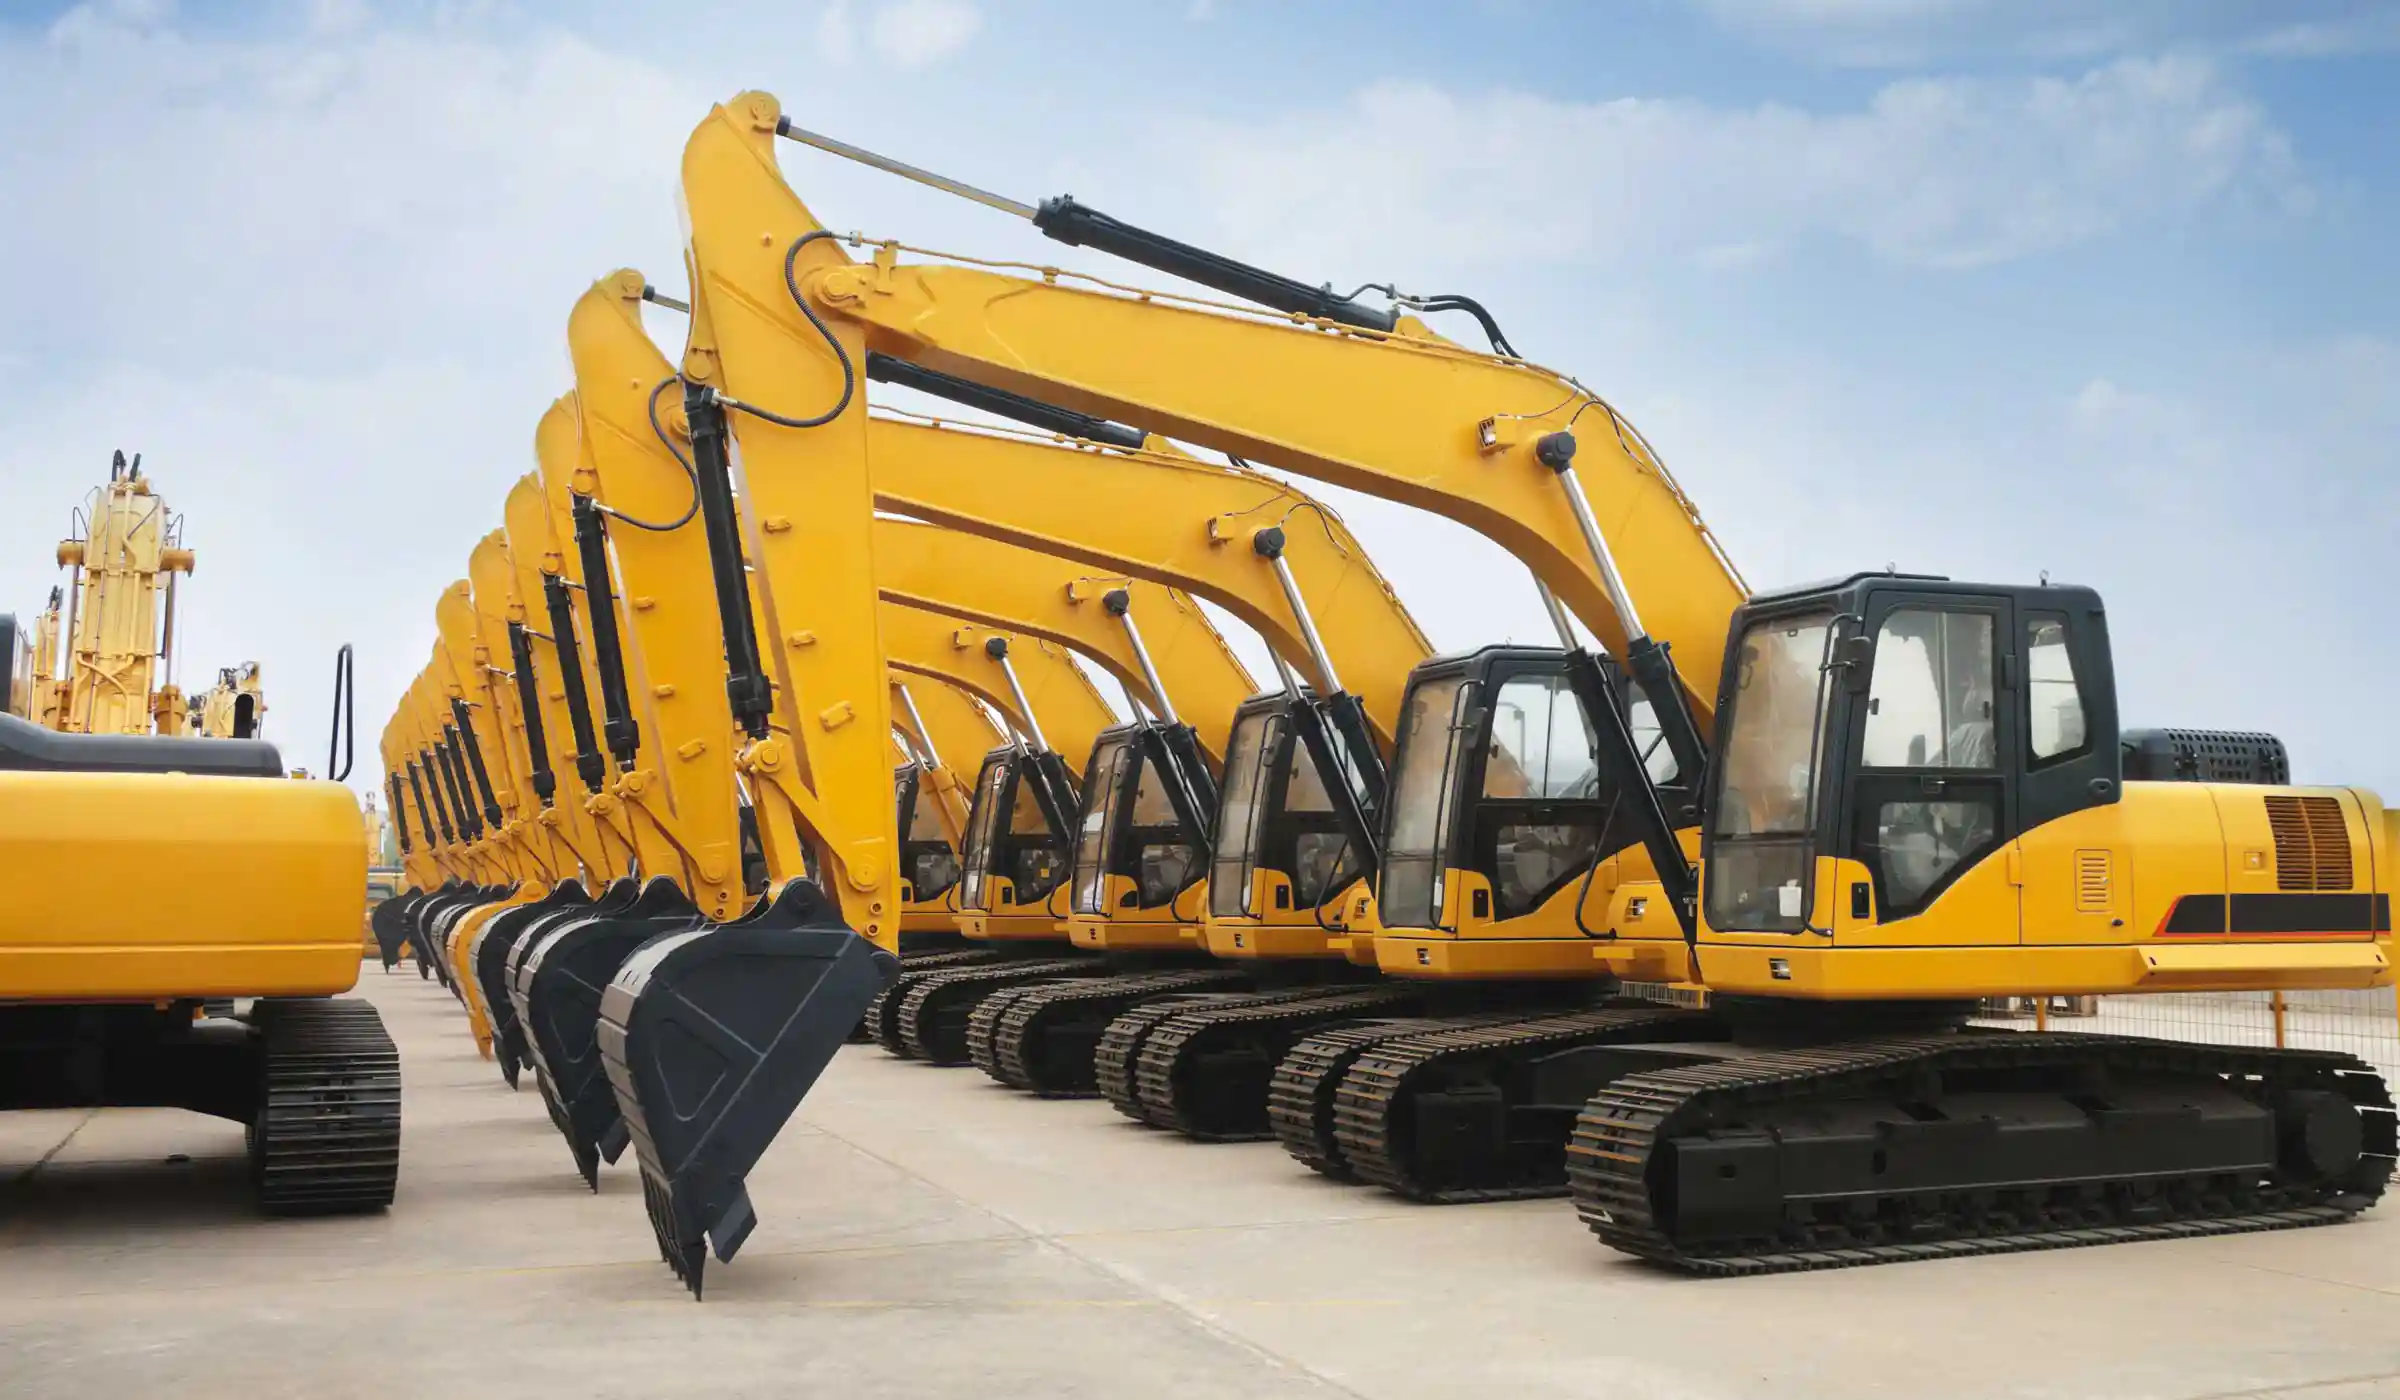 A lineup of yellow and black excavators at a machinery dealer